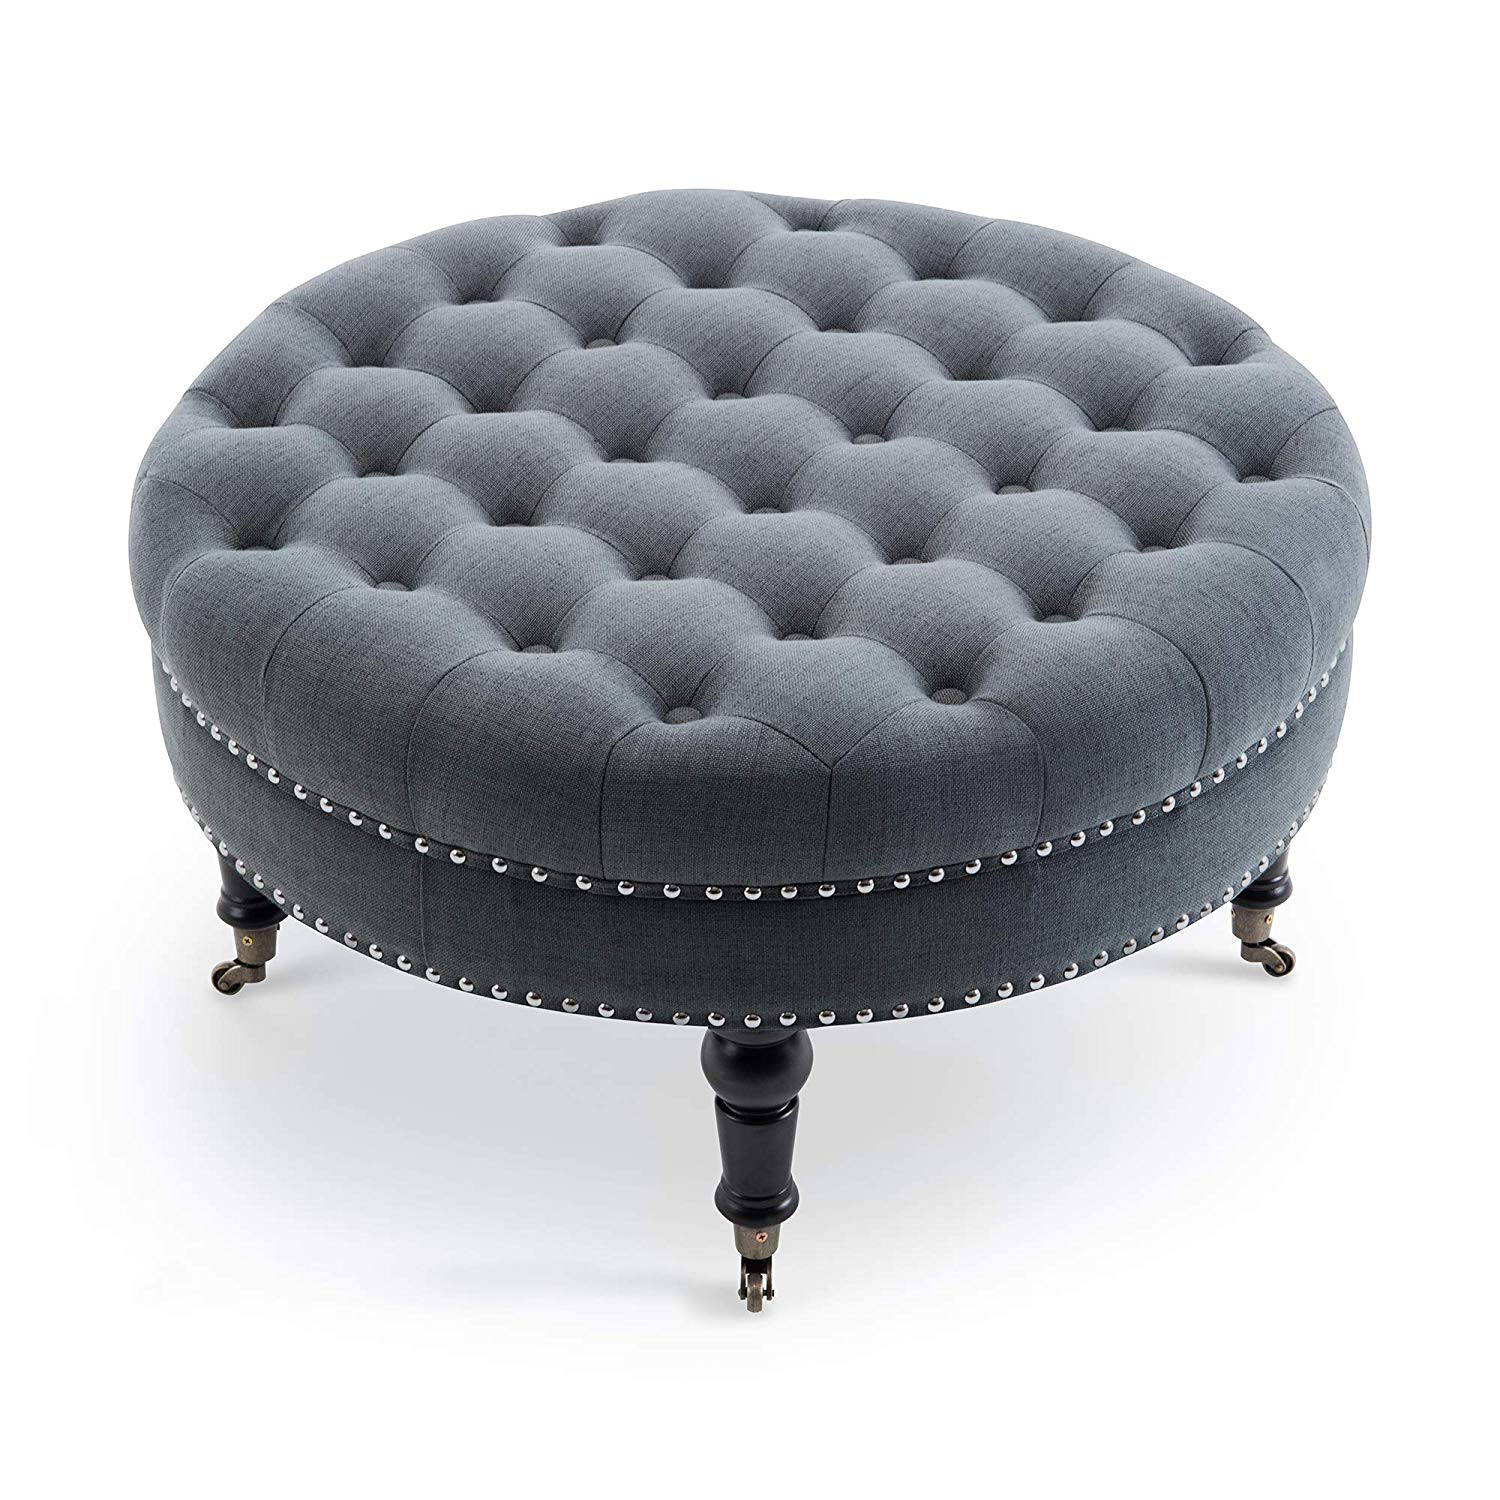 belleze inch round tufted linen ott large cqwsuiml sasha accent table footstool cocktail with caster gray kitchen dining side shelf lamp and light lighting lamps razer ouroboros